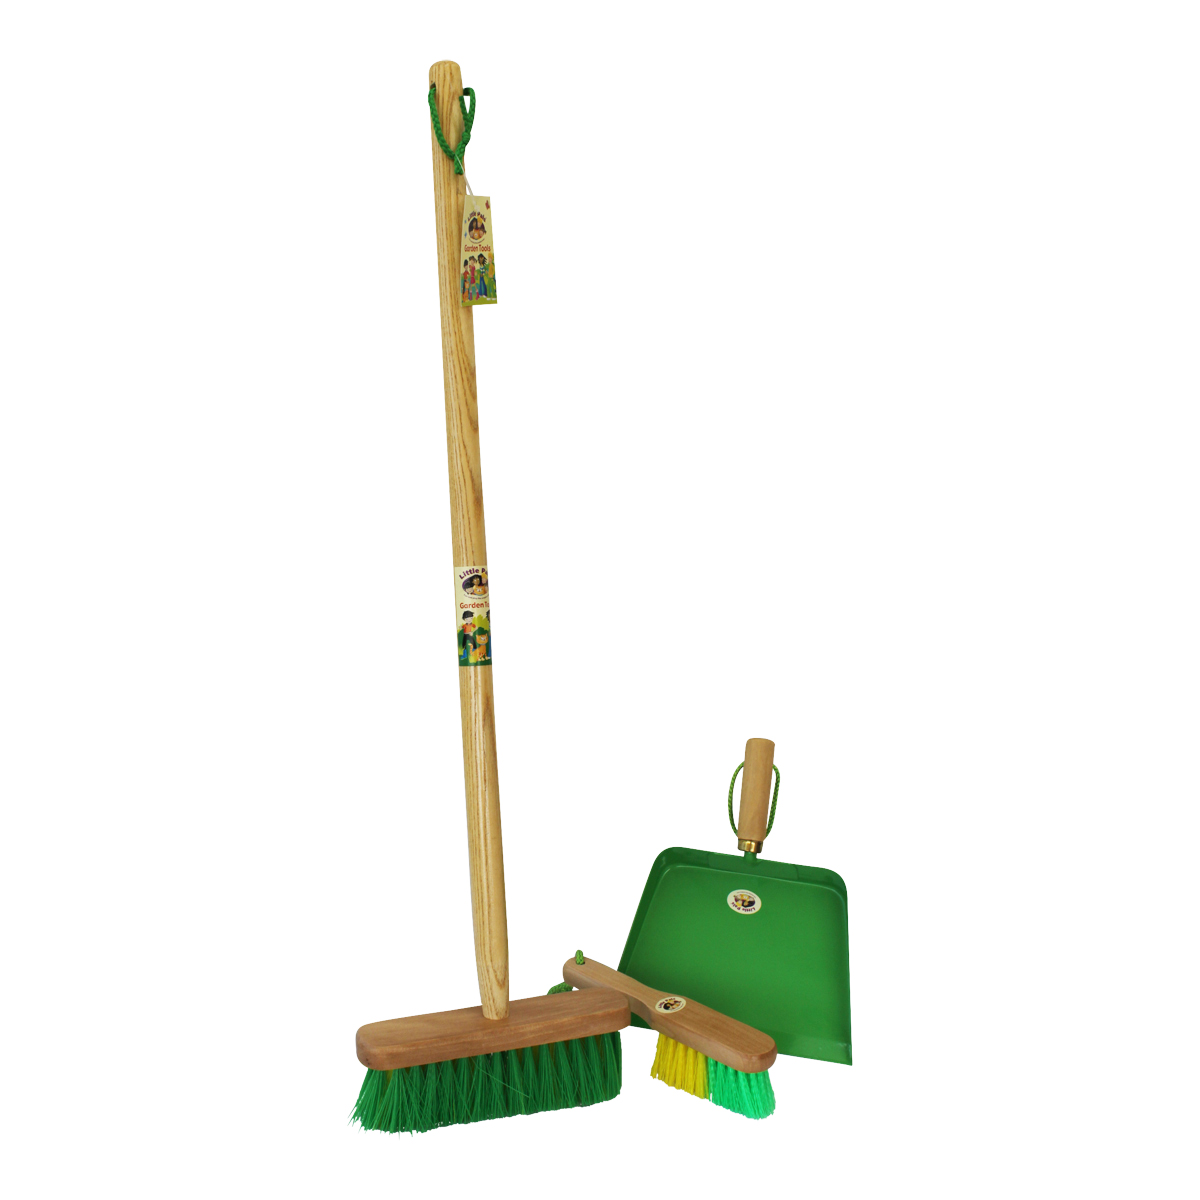 Childrens broom, dustpan and and brush set